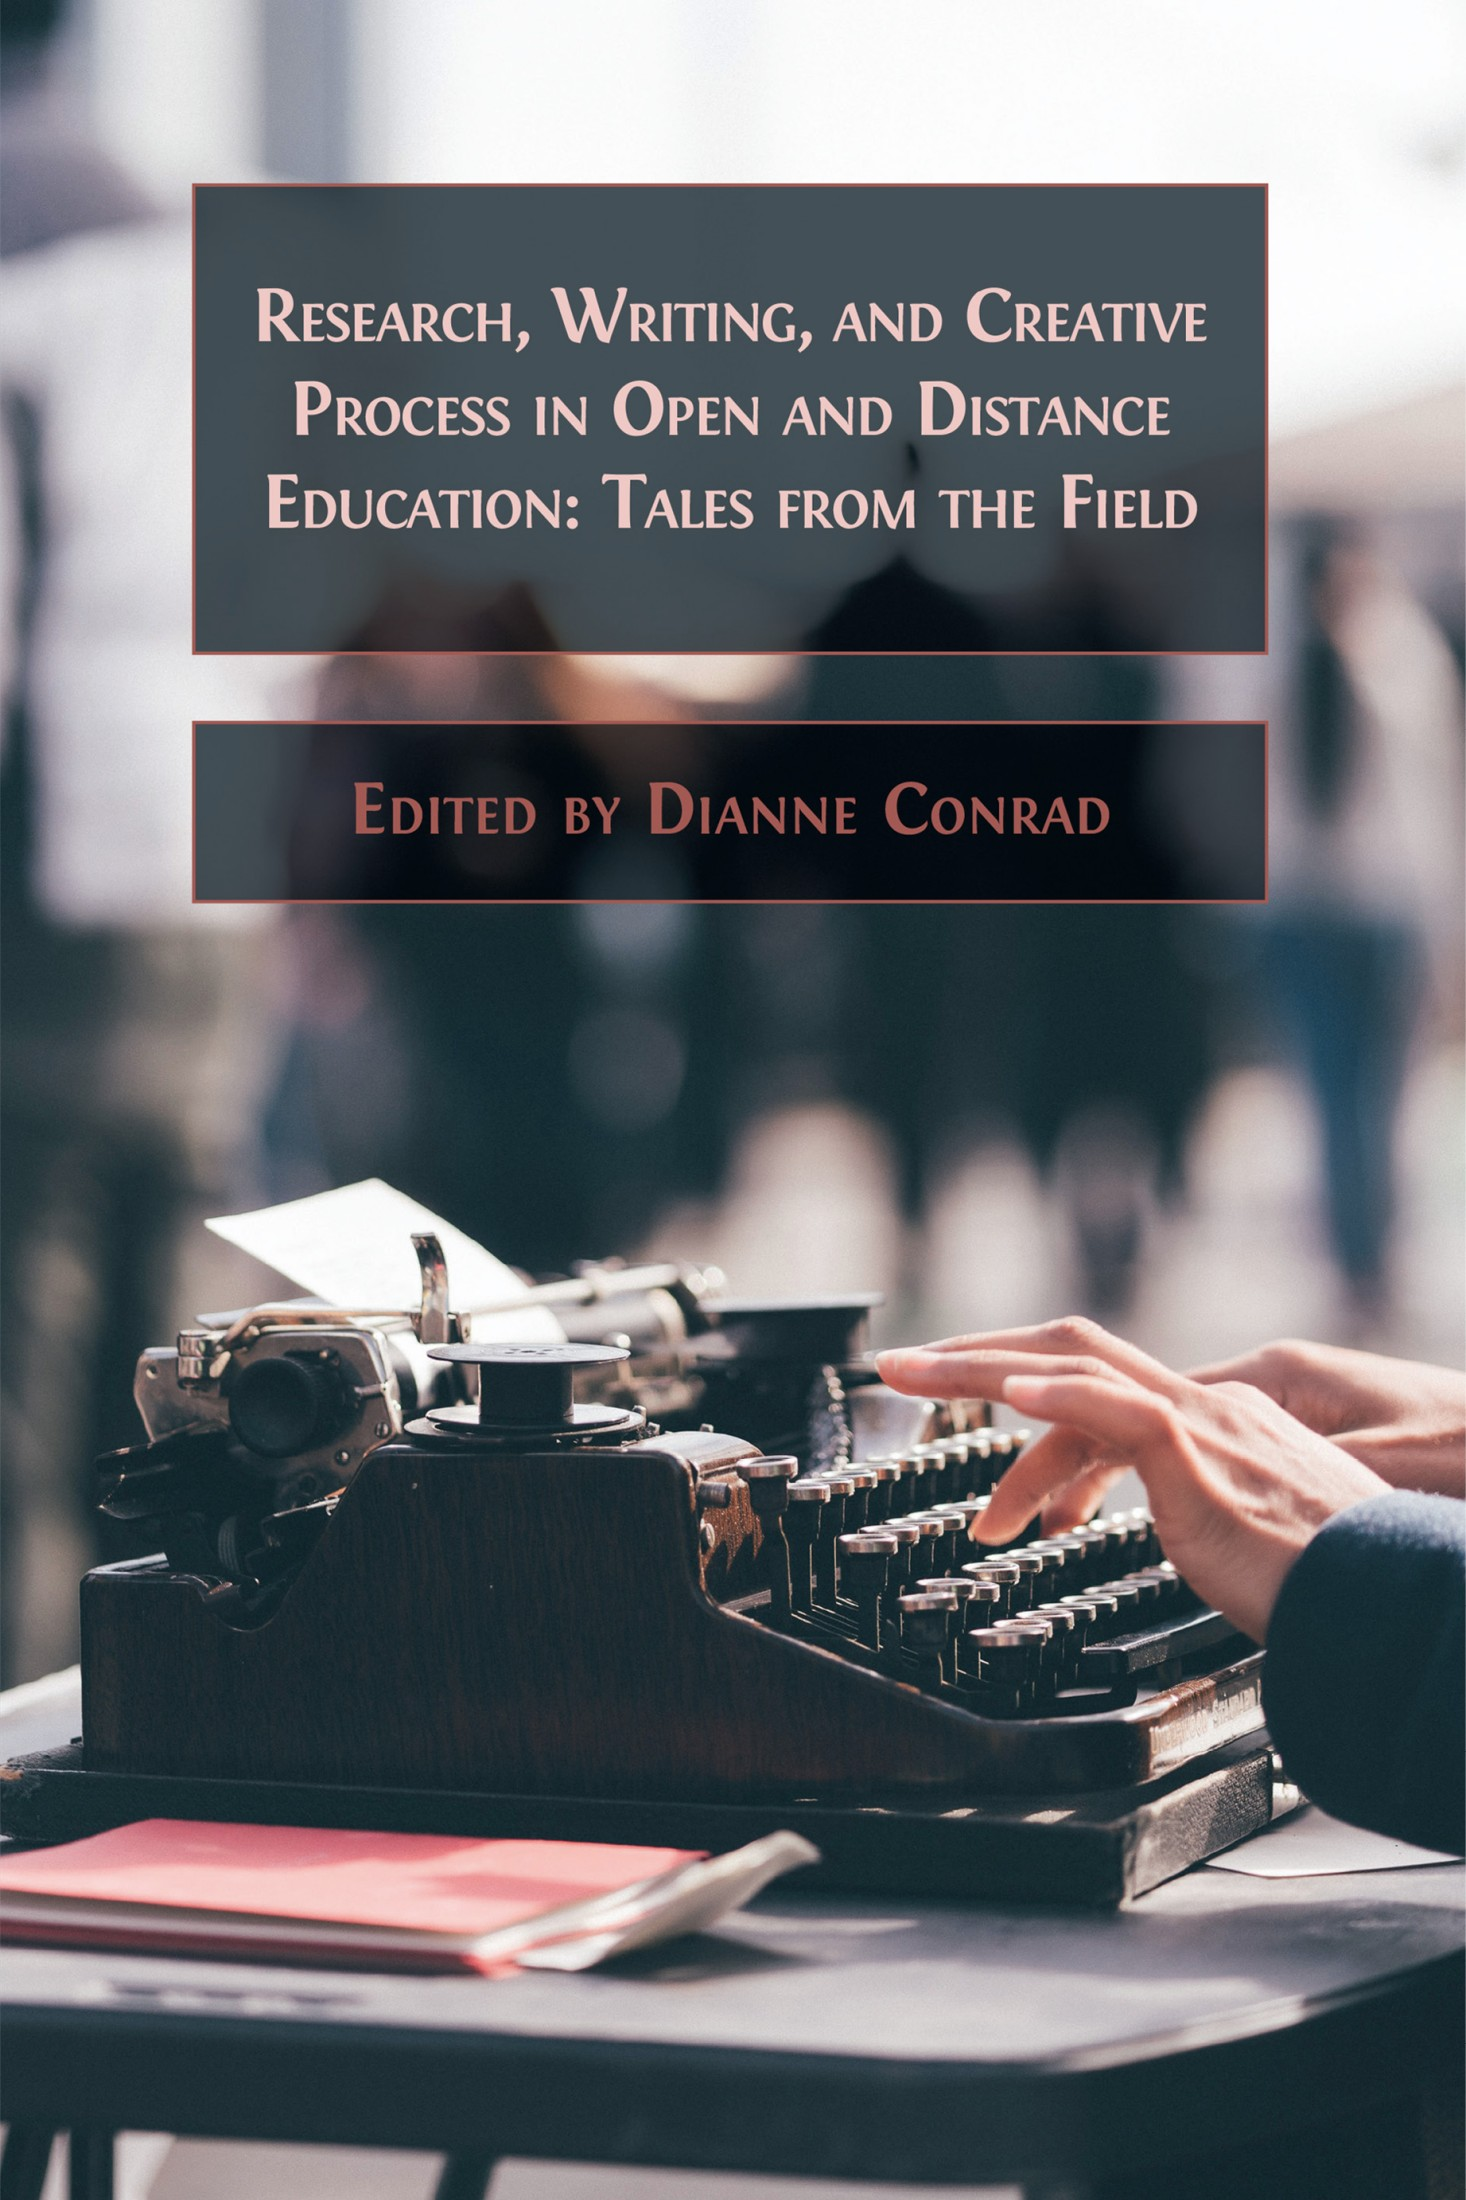 Research, Writing, and Creative Process in Open and Distance Education book cover image